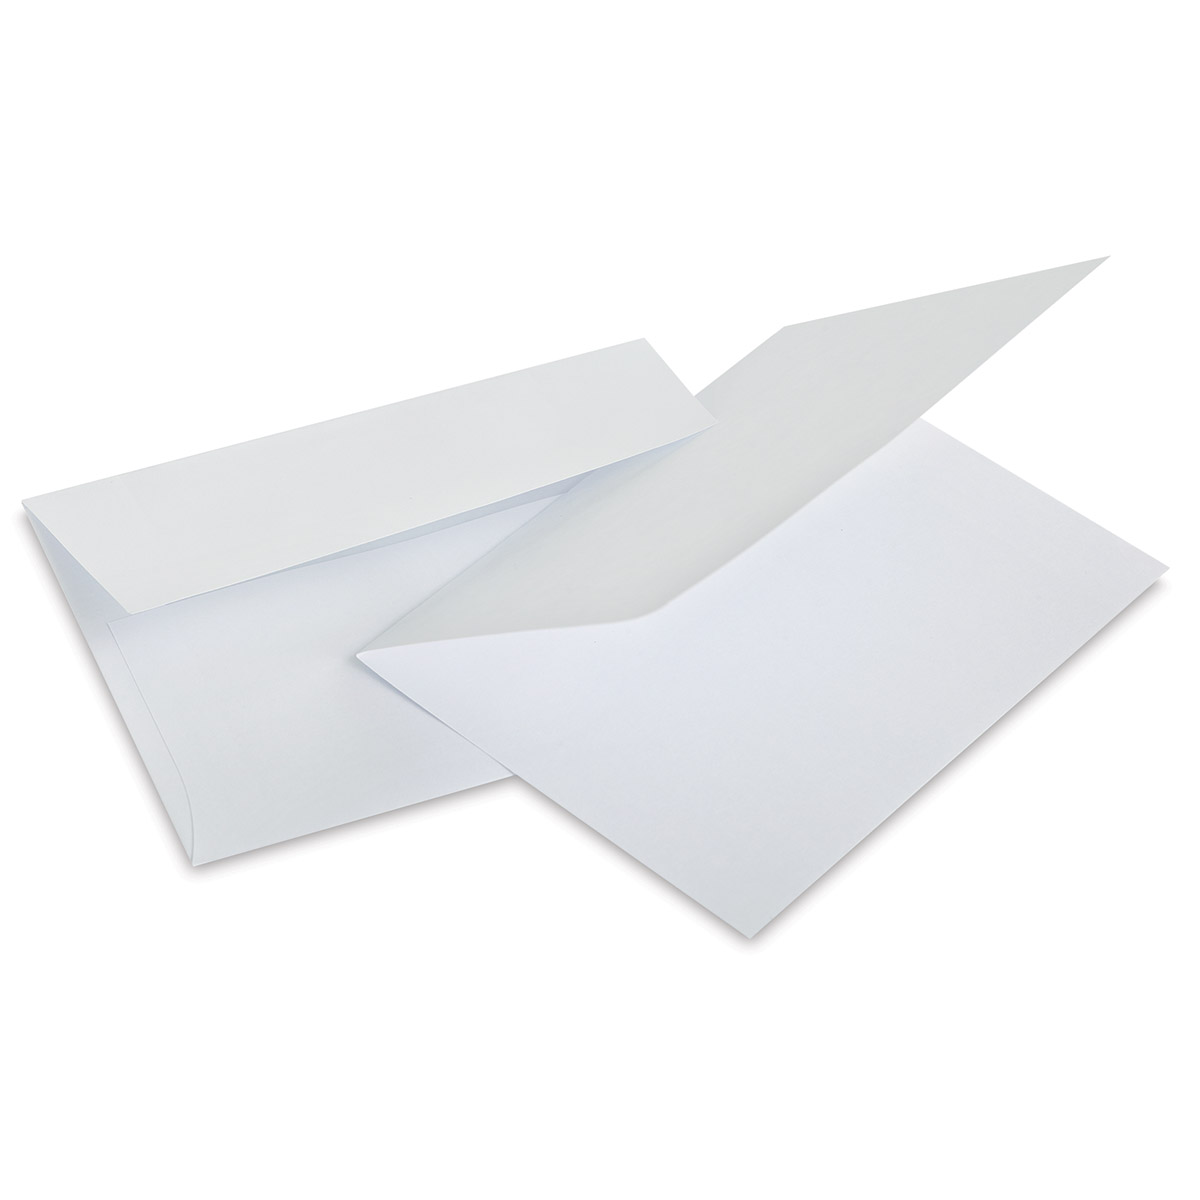 PA Paper Accents Card and Envelope - 4-1/4-inch x 5-1/2-inch - 50